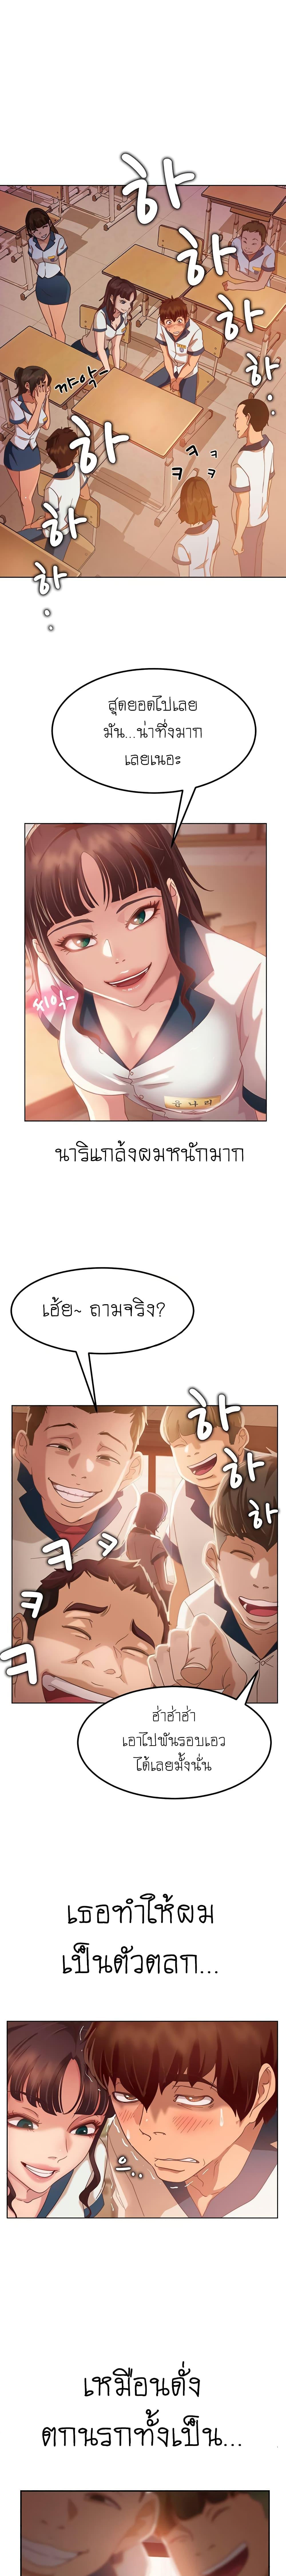 A Twisted Day 1 ภาพ 17